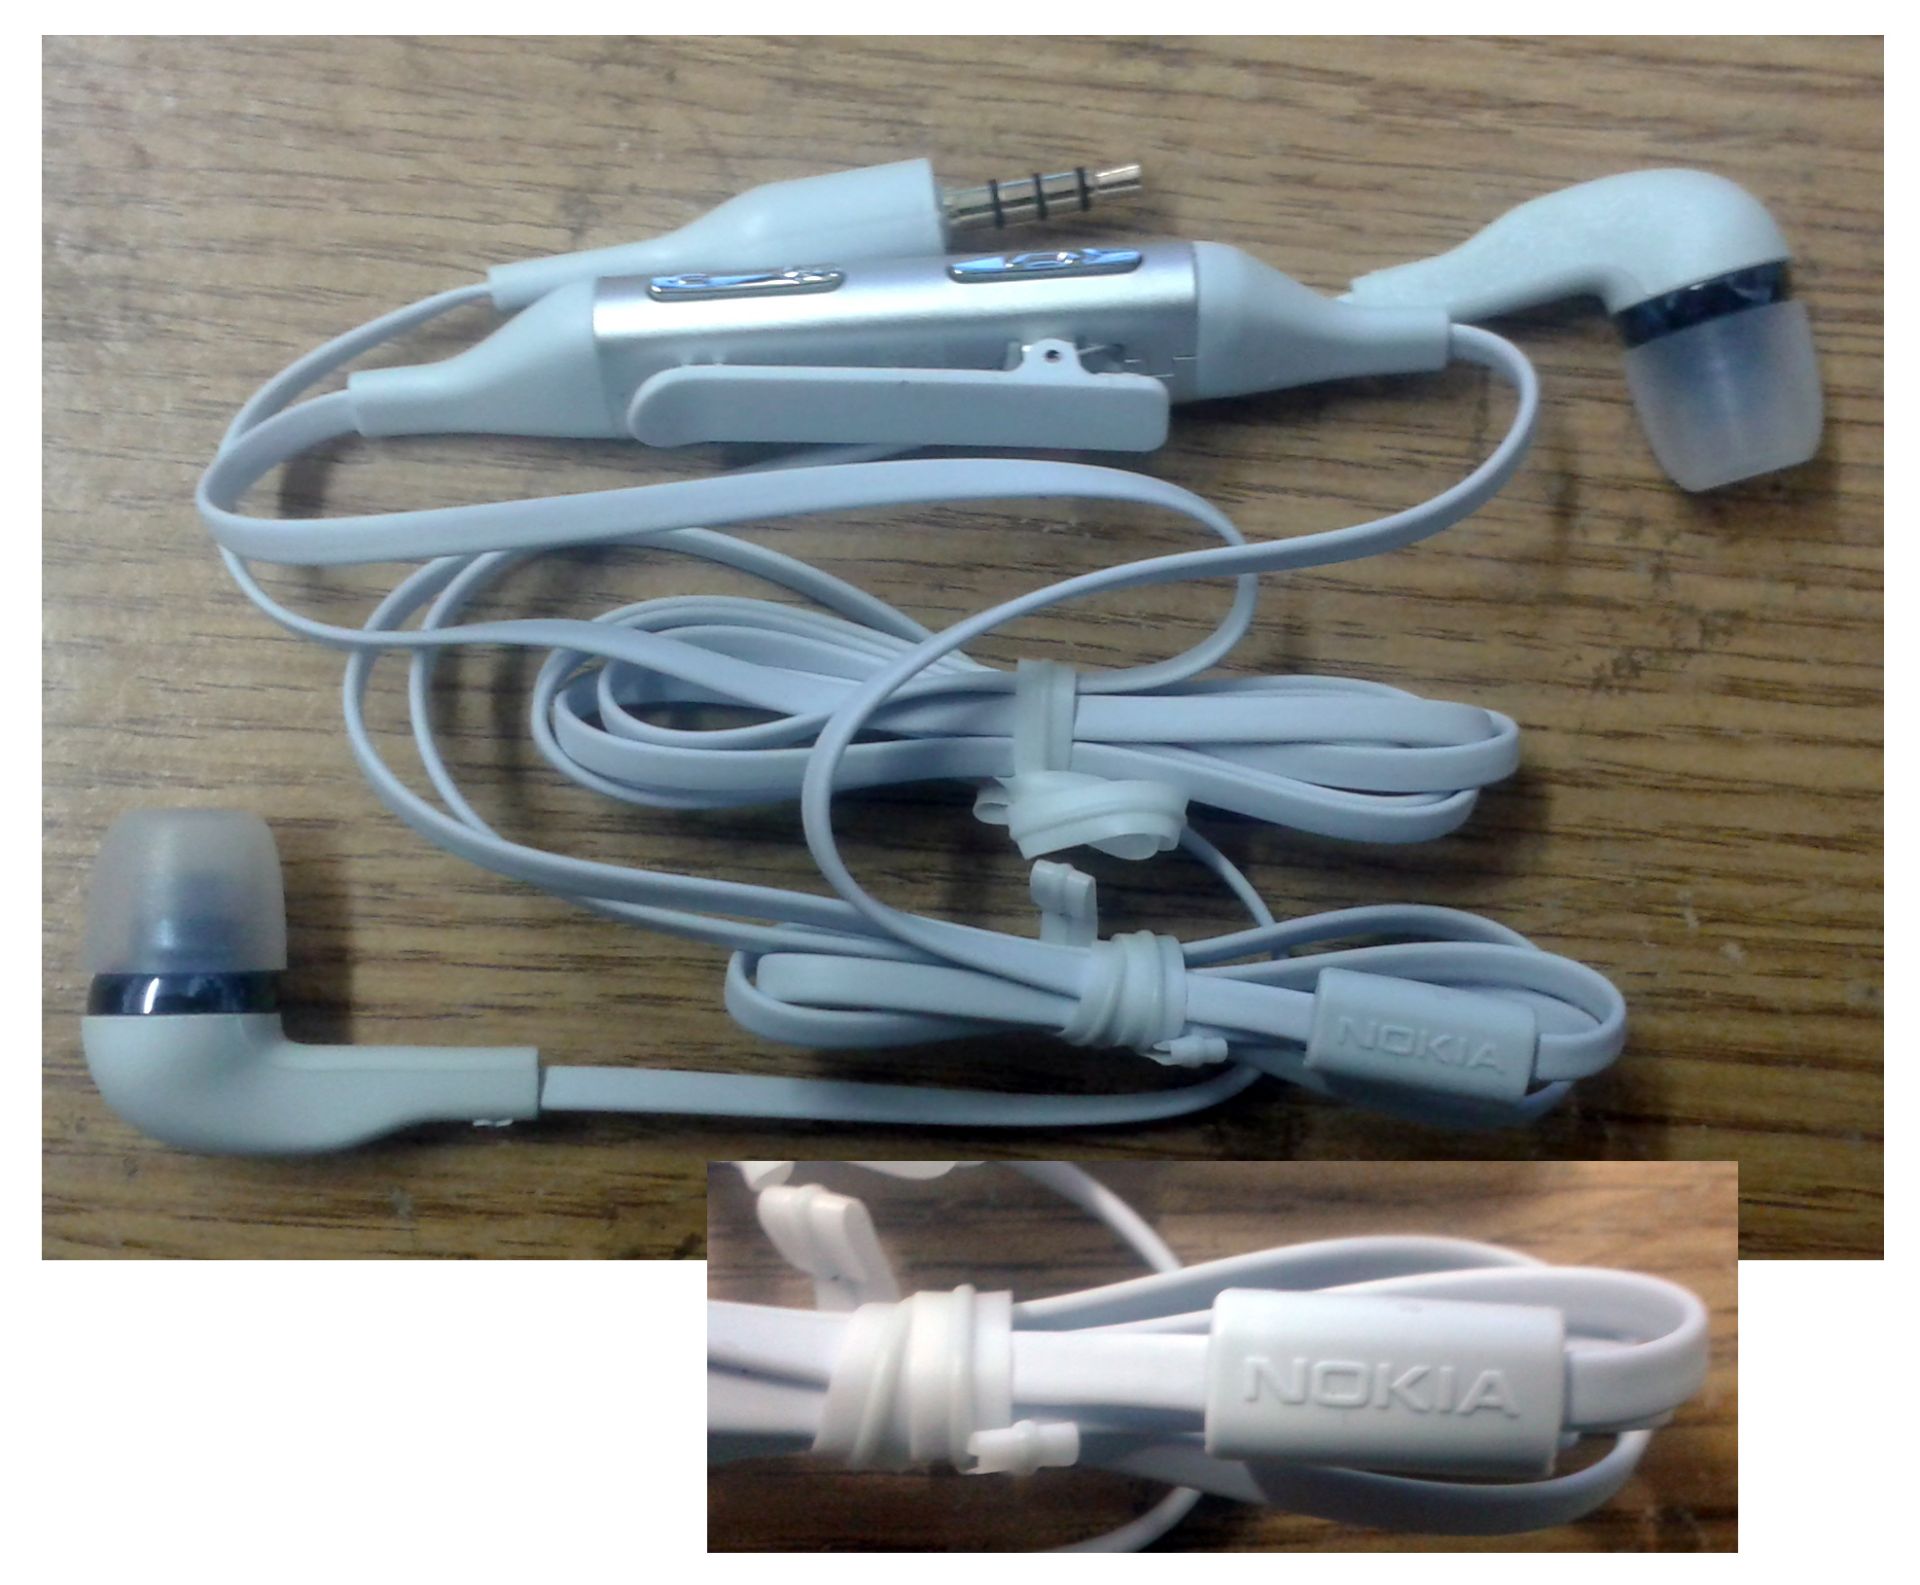 Lot of 50 Units-Nokia WH-701 Wired Stereo Music Headset (White) - Bulk Packed - Image 2 of 2